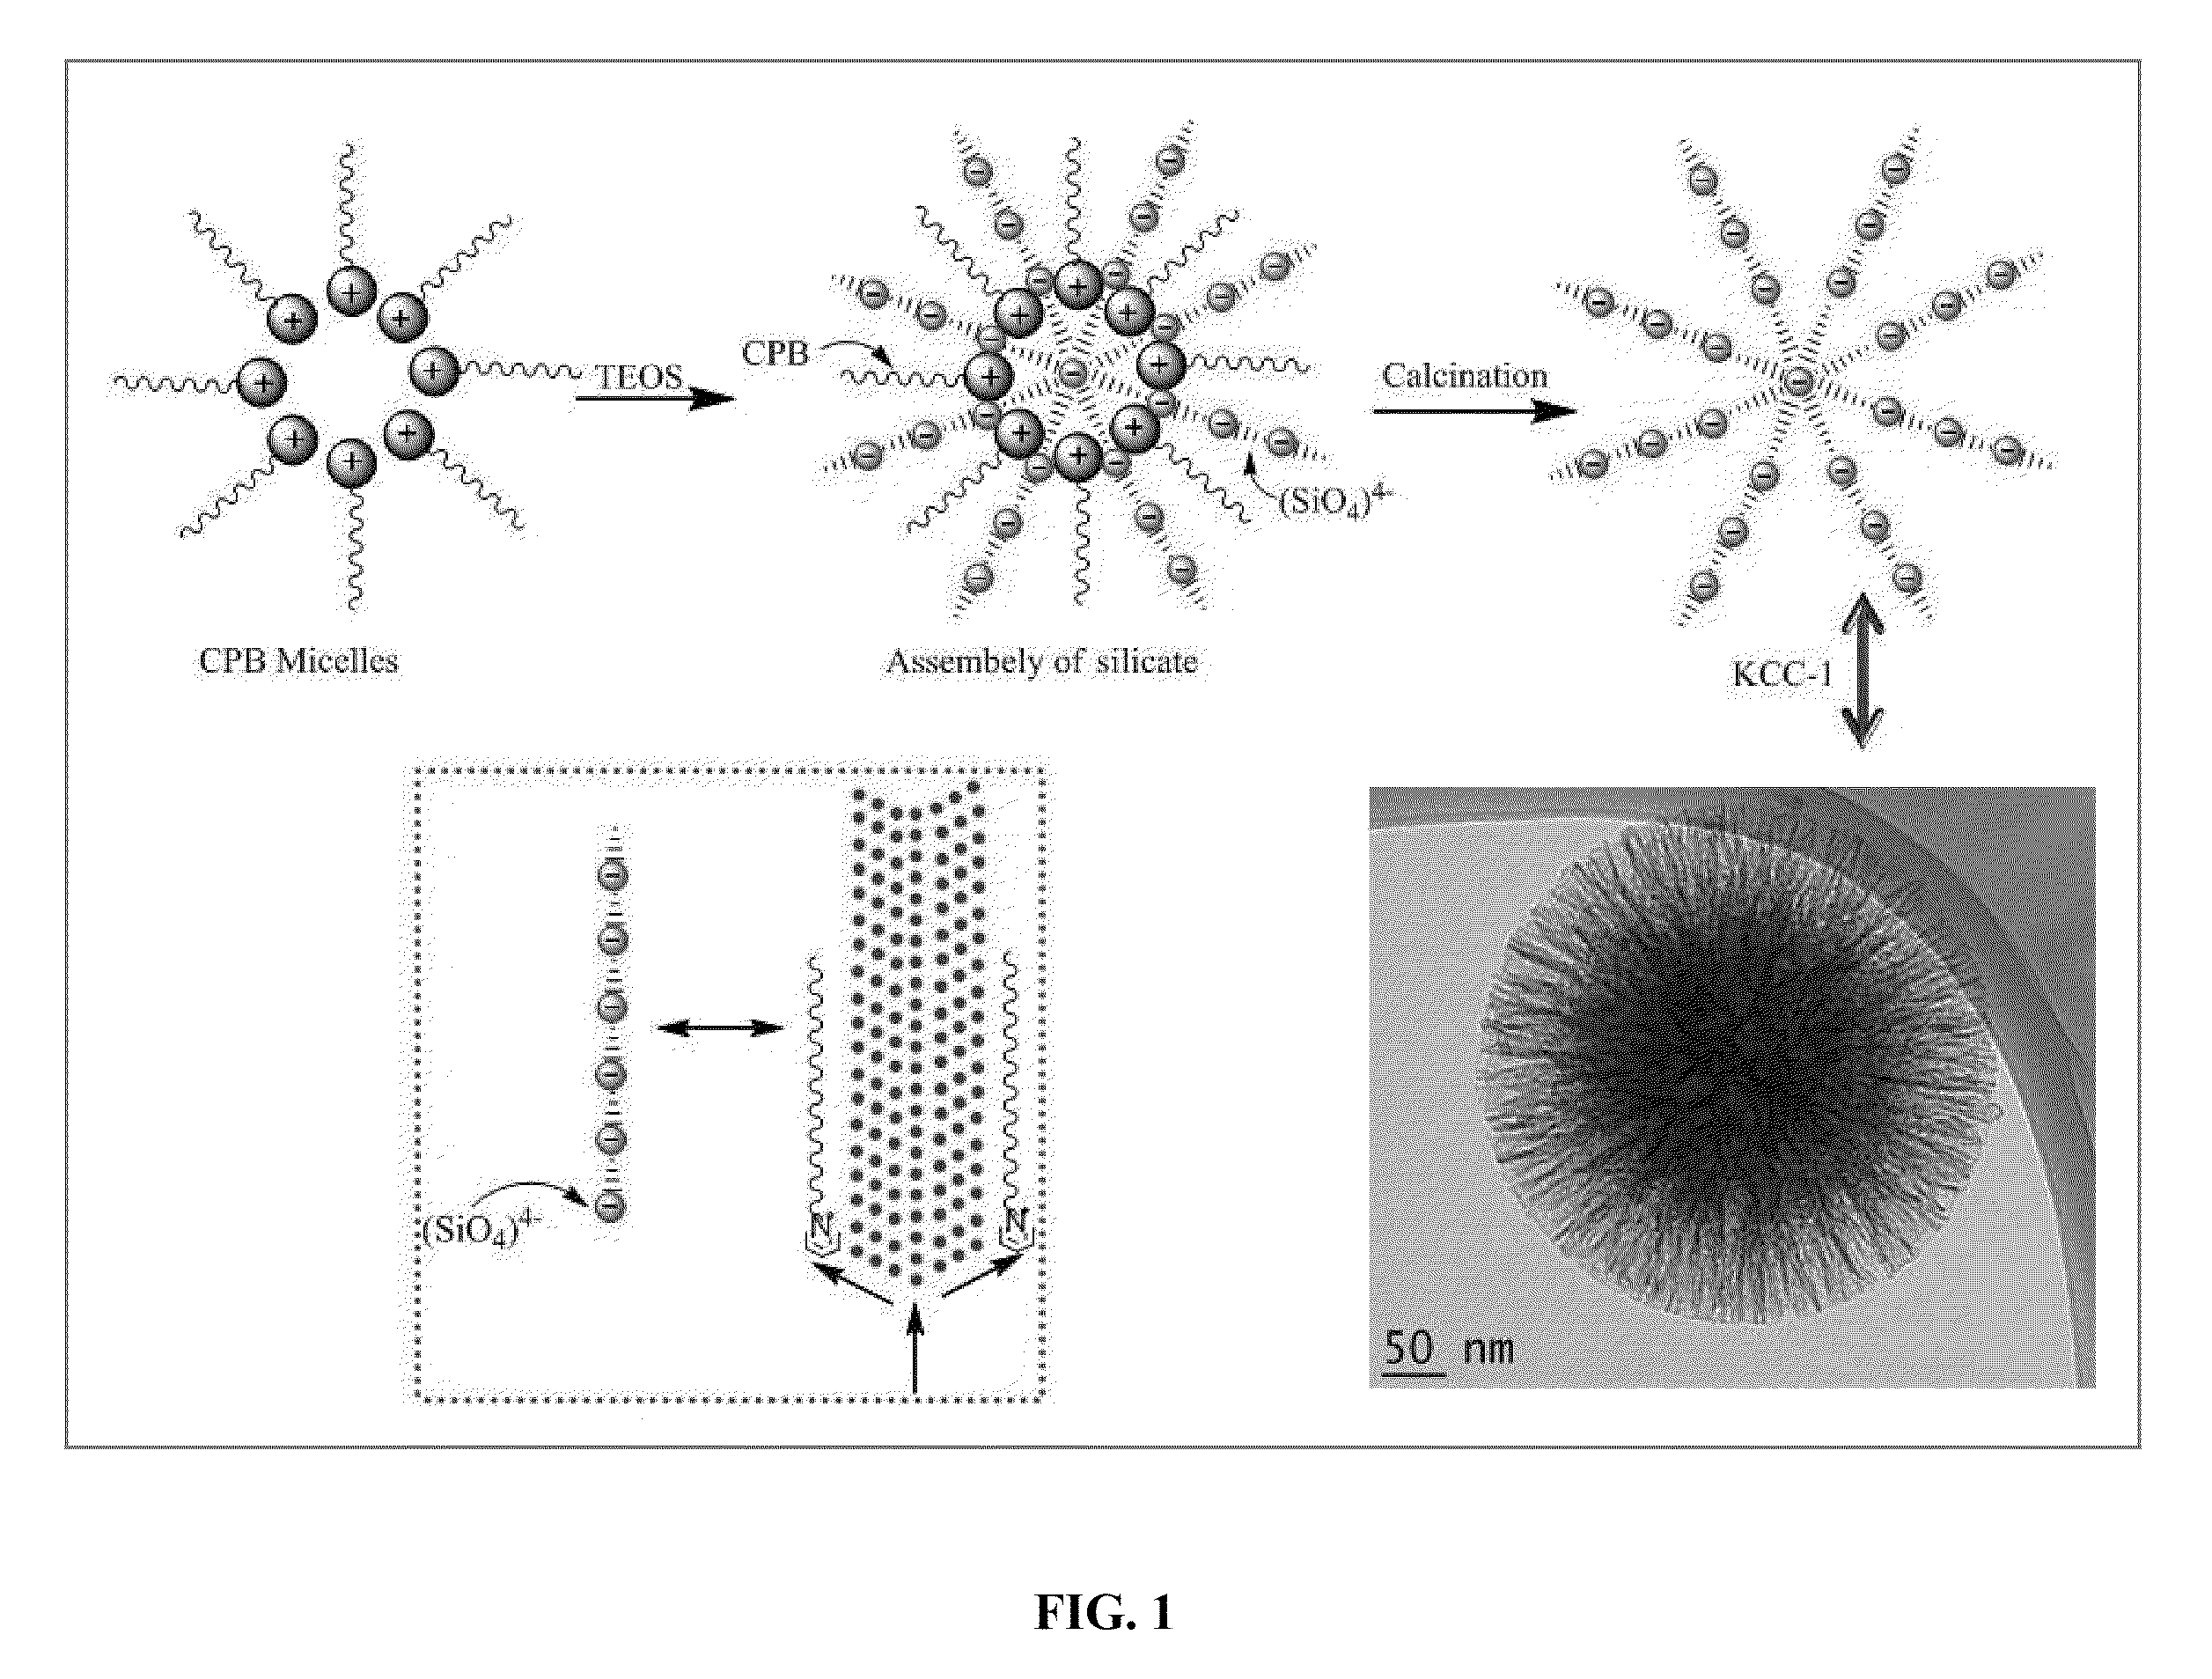 High Surface Area Fibrous Silica Nanoparticles